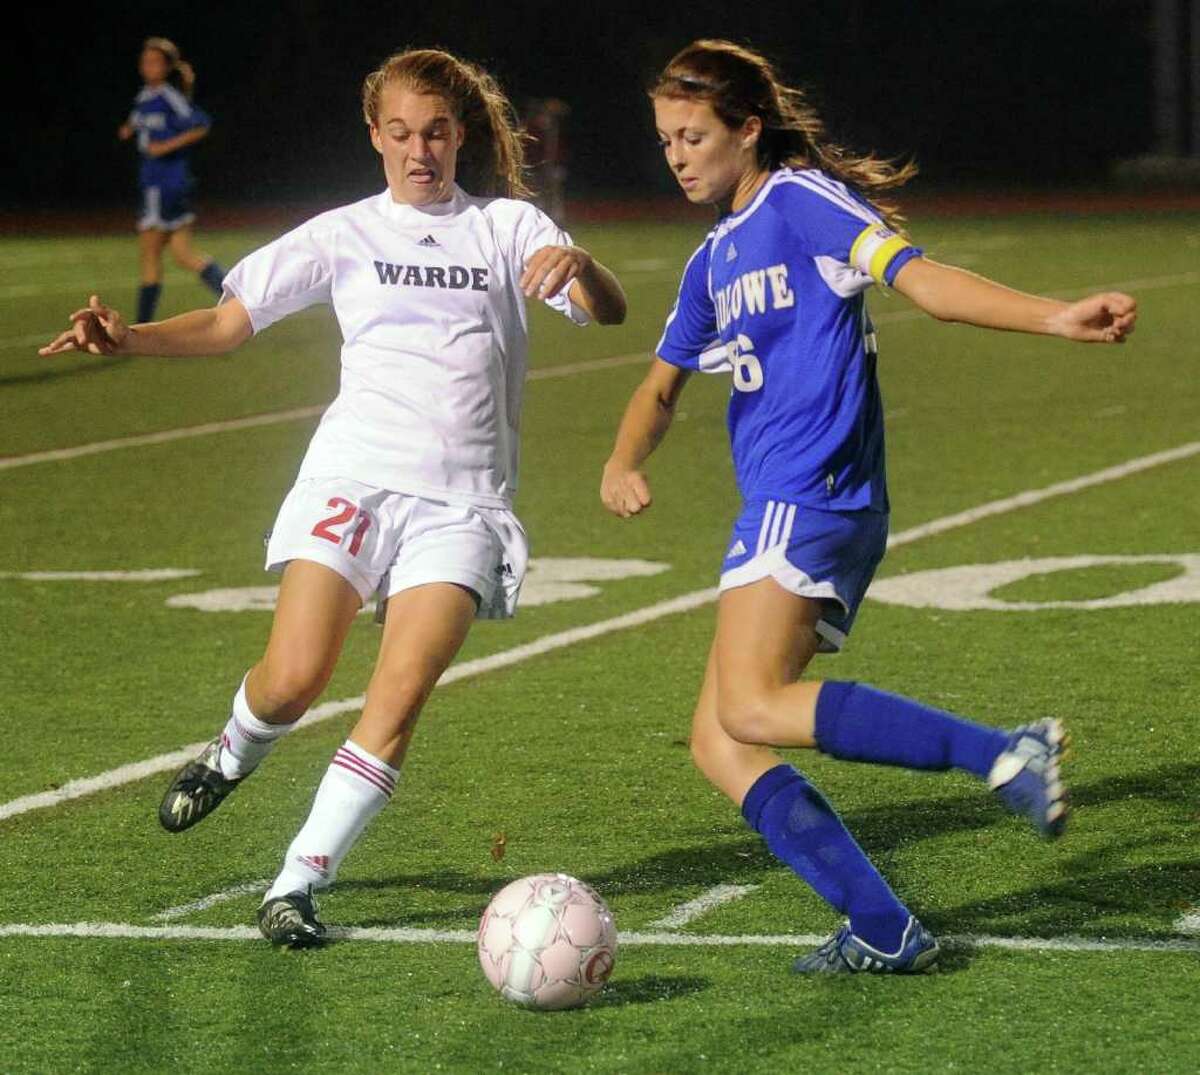 Tuesday's high school roundup: Warde edges Ludlowe in girls soccer